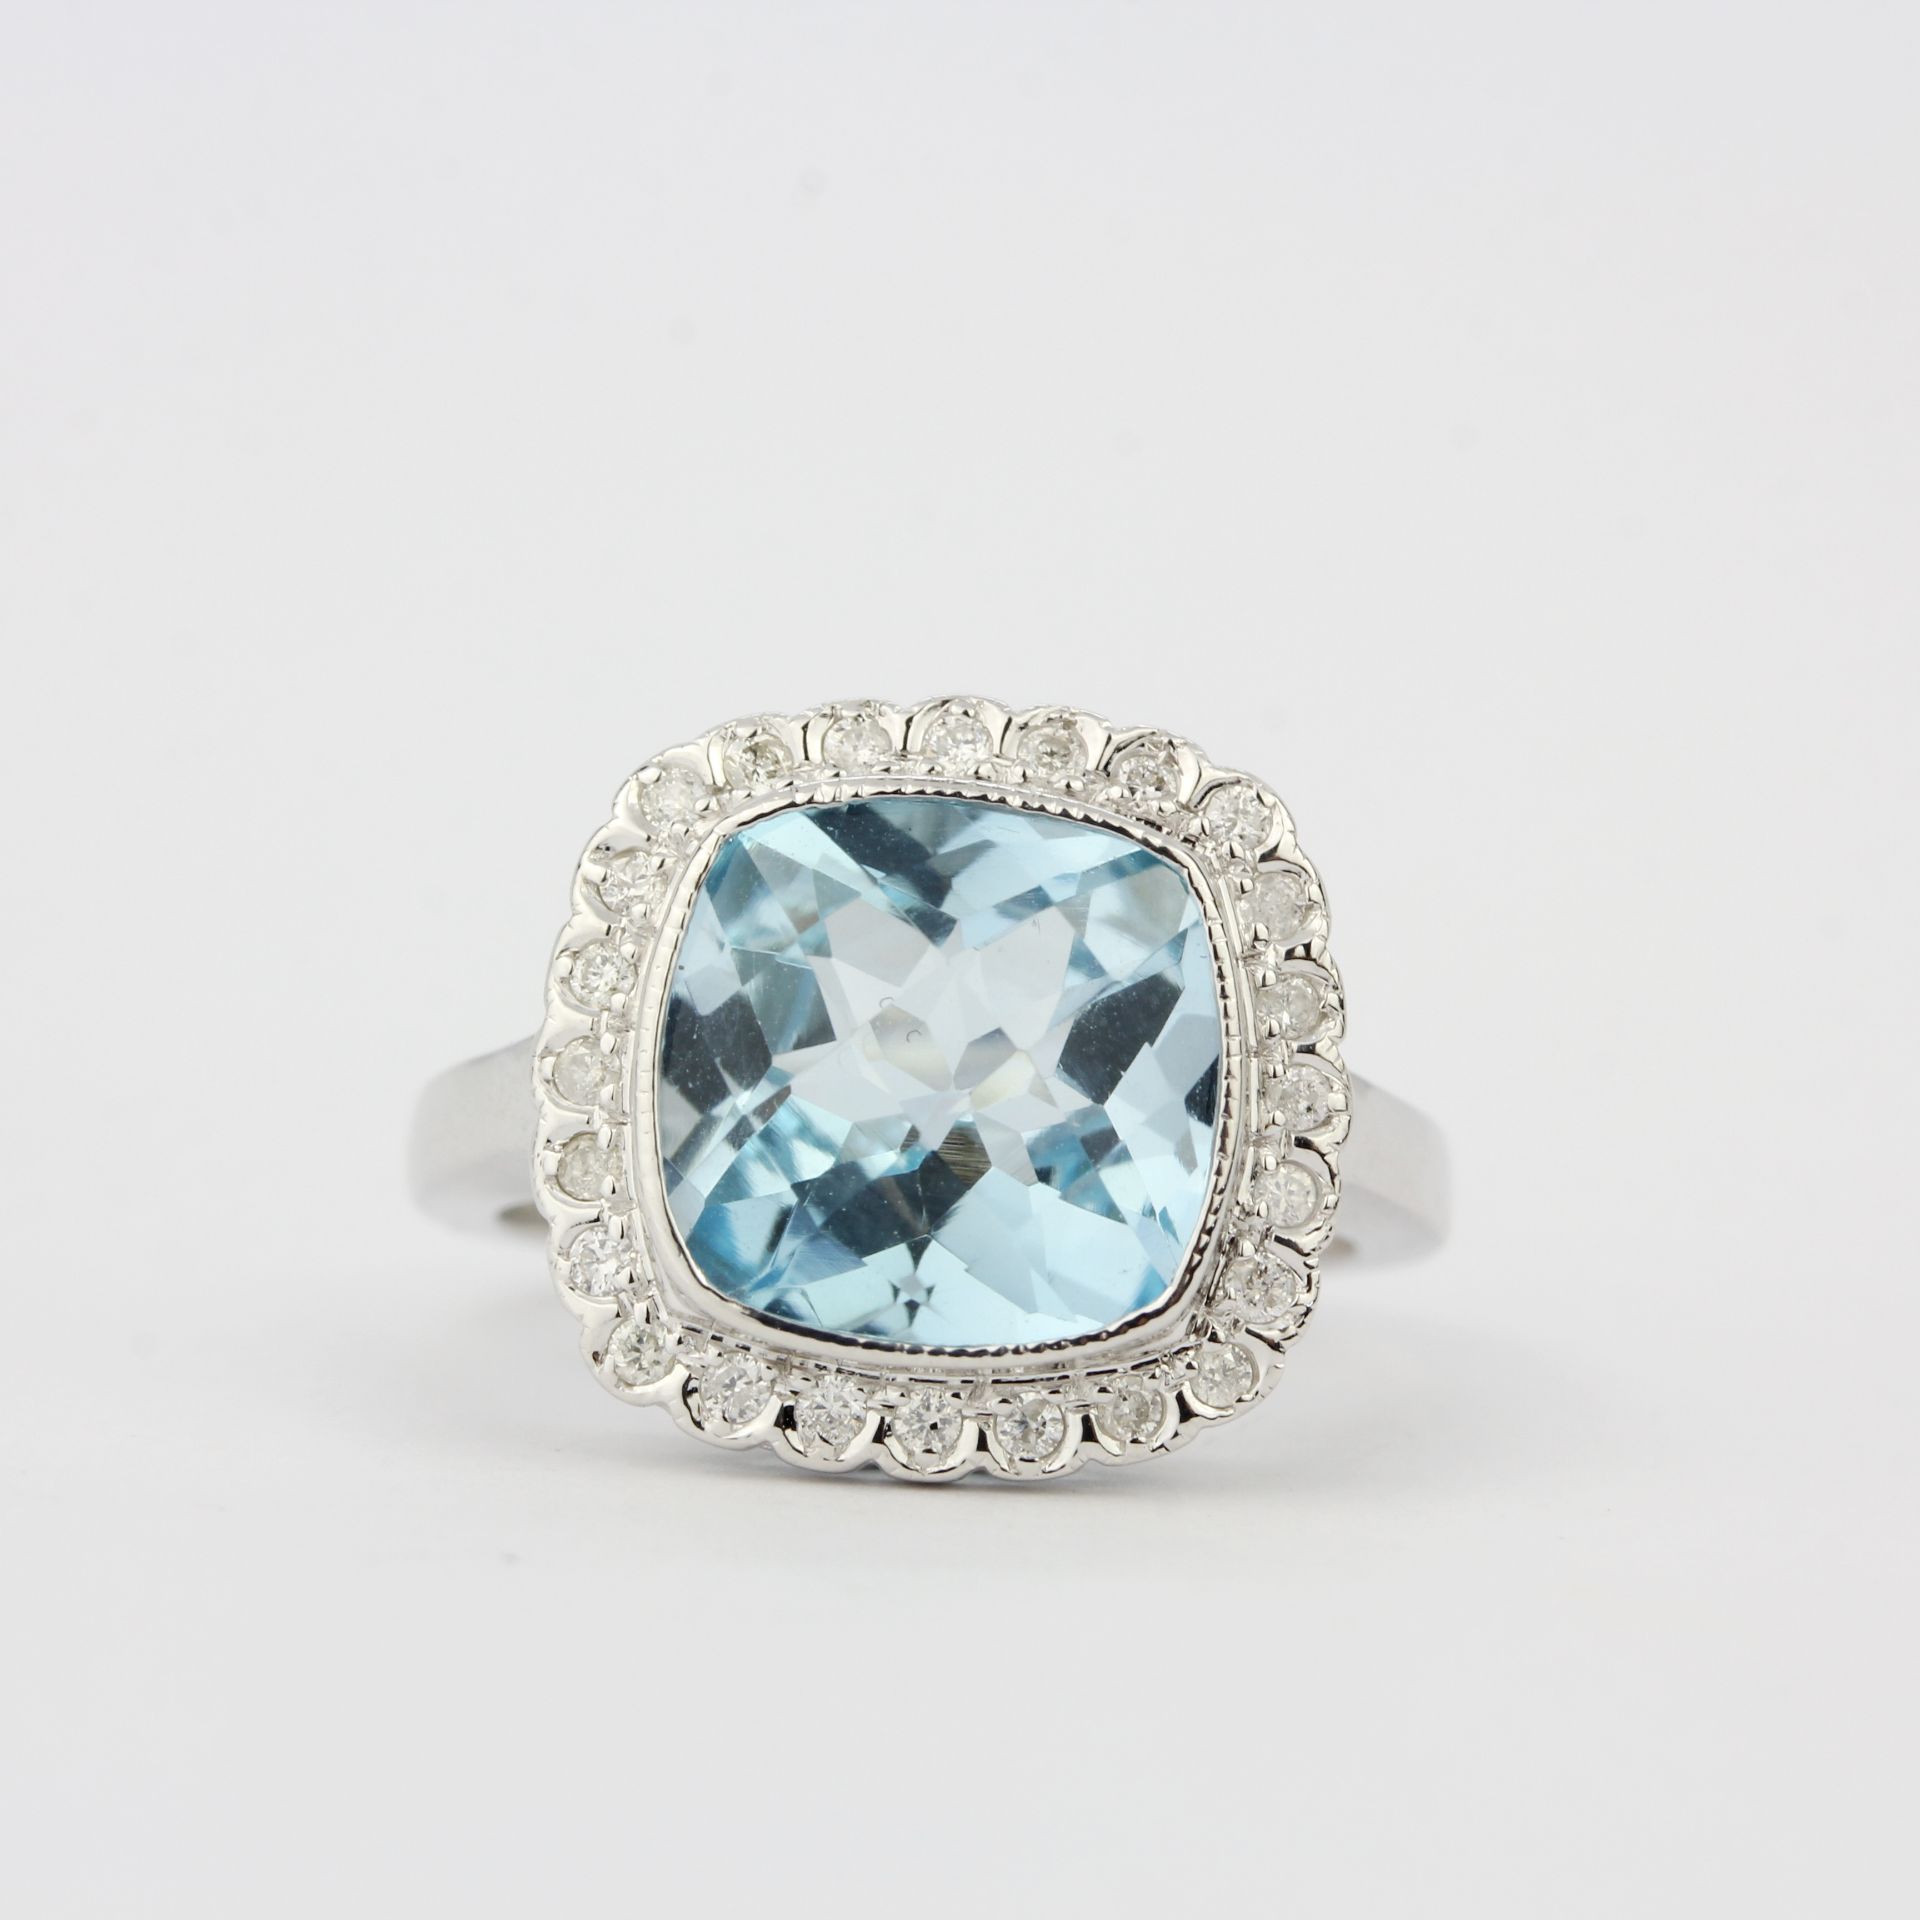 A 9ct white gold ring set with a checker board aquamarine and diamonds, ring size L. - Image 3 of 4